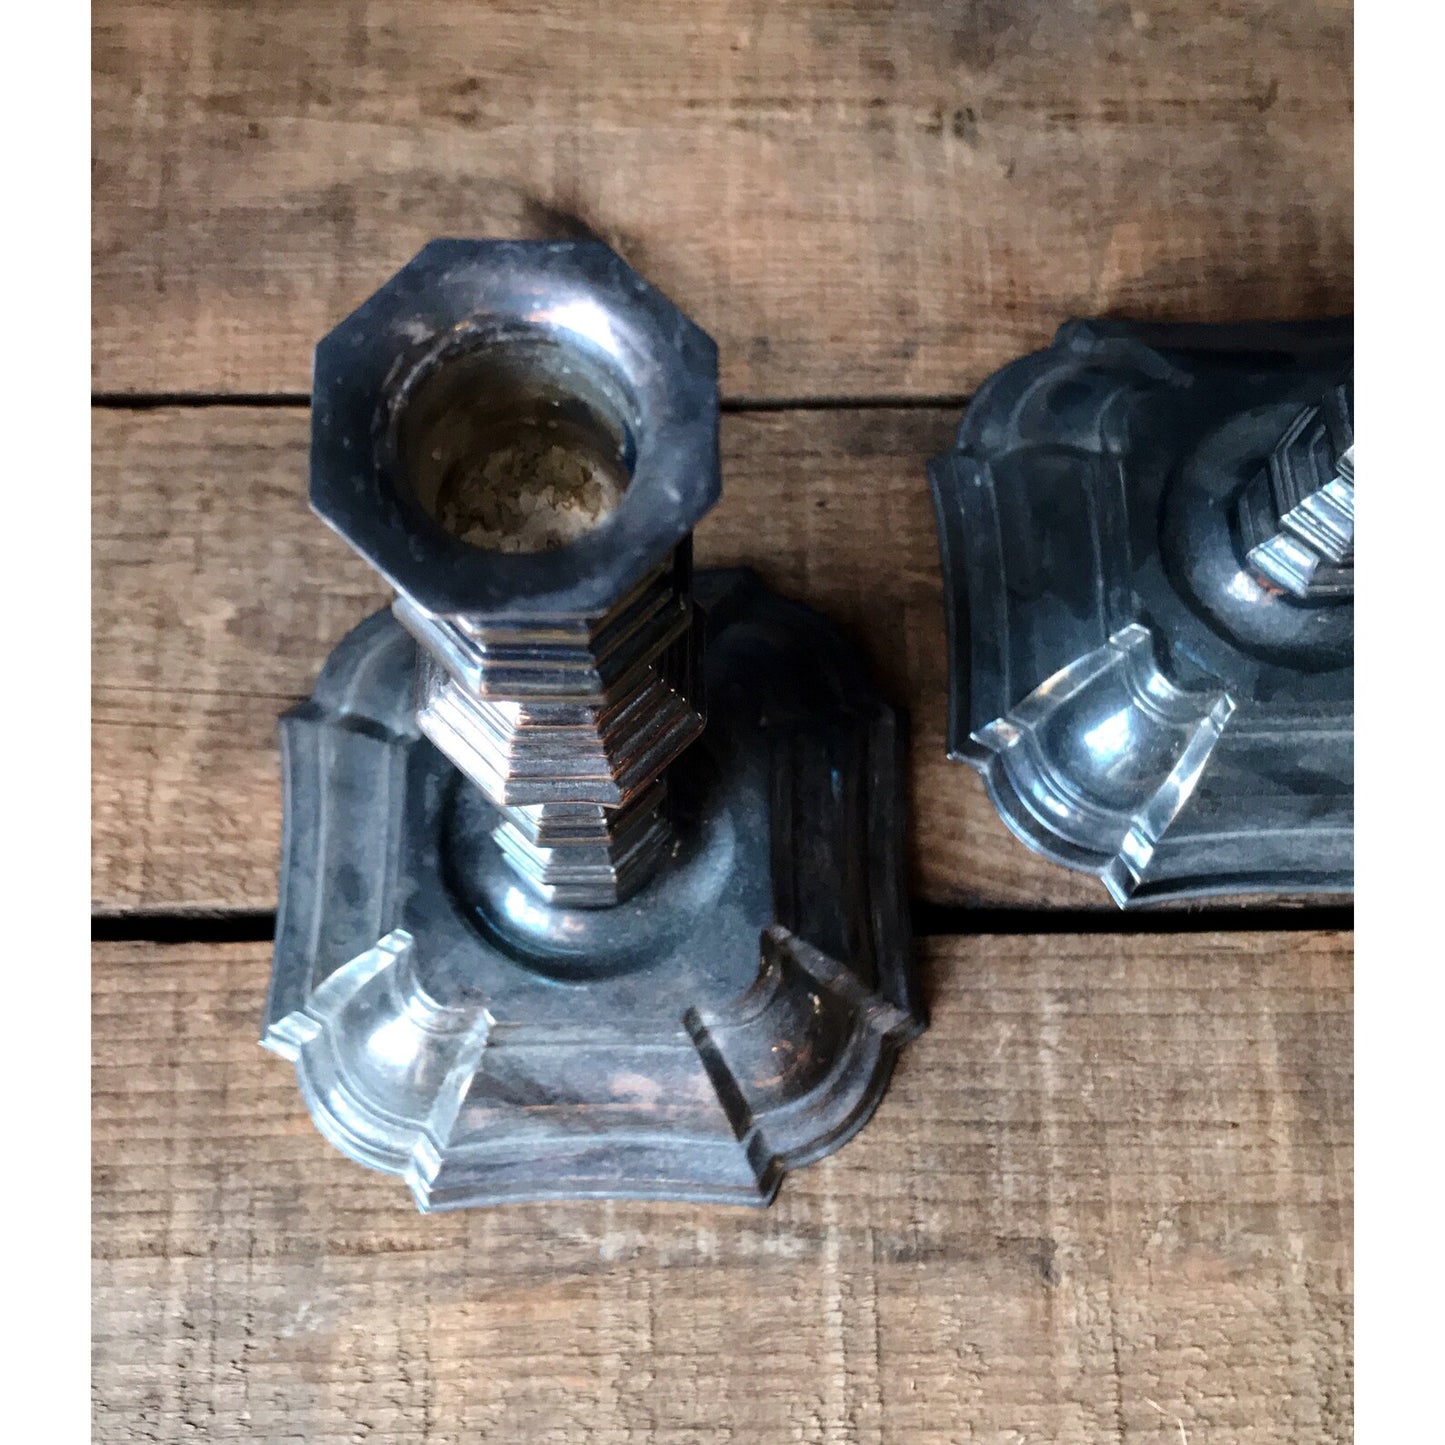 Pair of Silver Turned Taper Candleholders